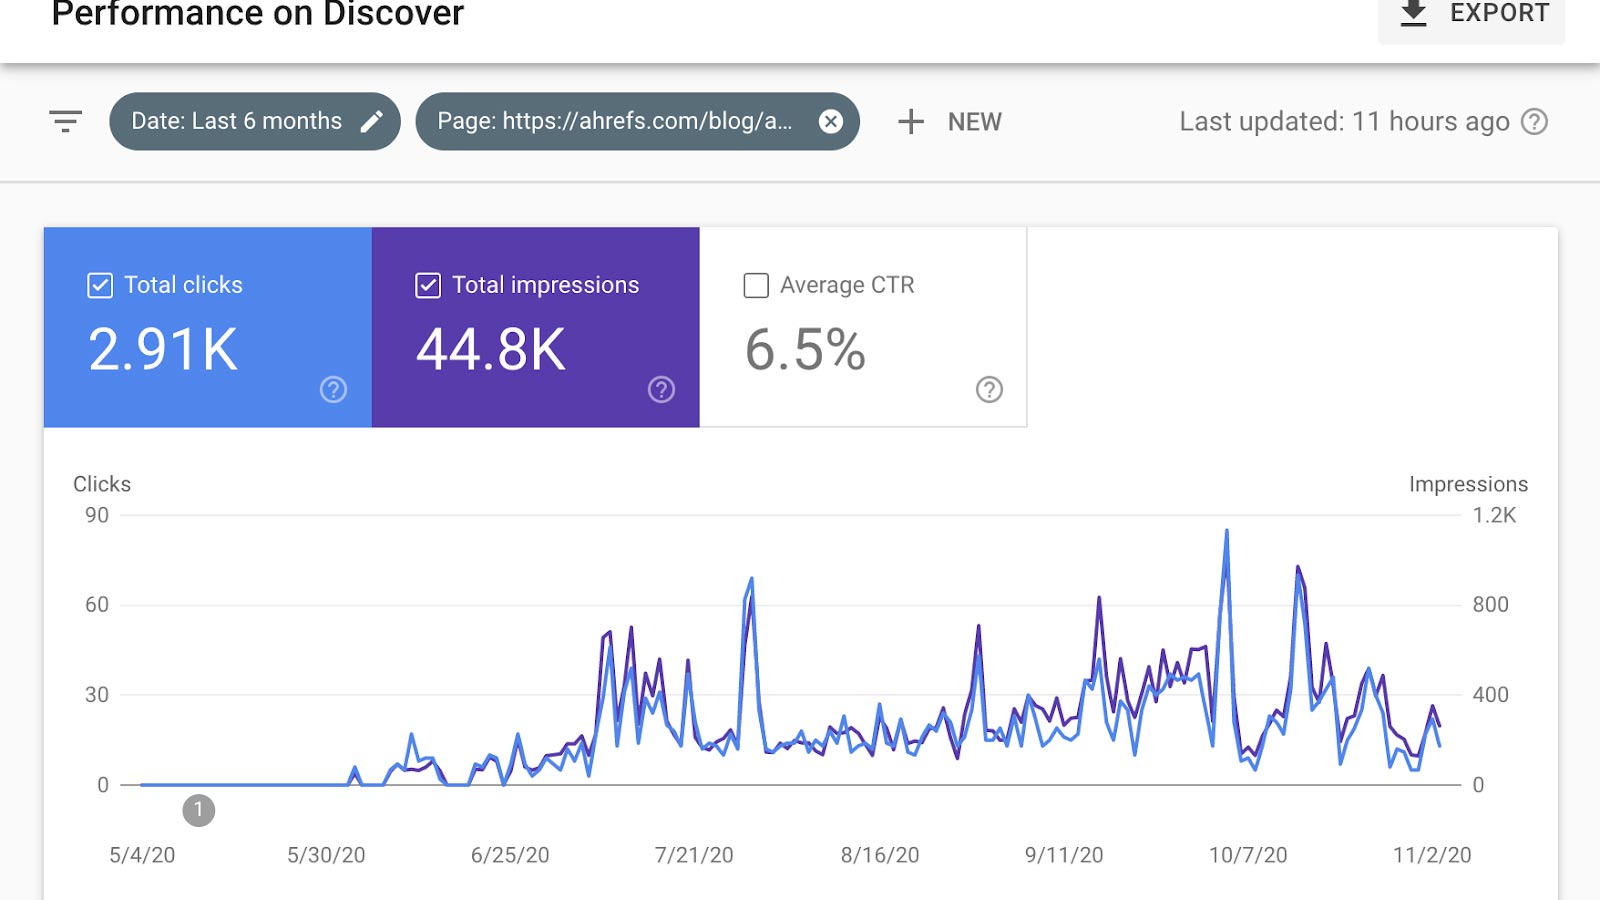 Google Search Console with traffic data from Google Discover.